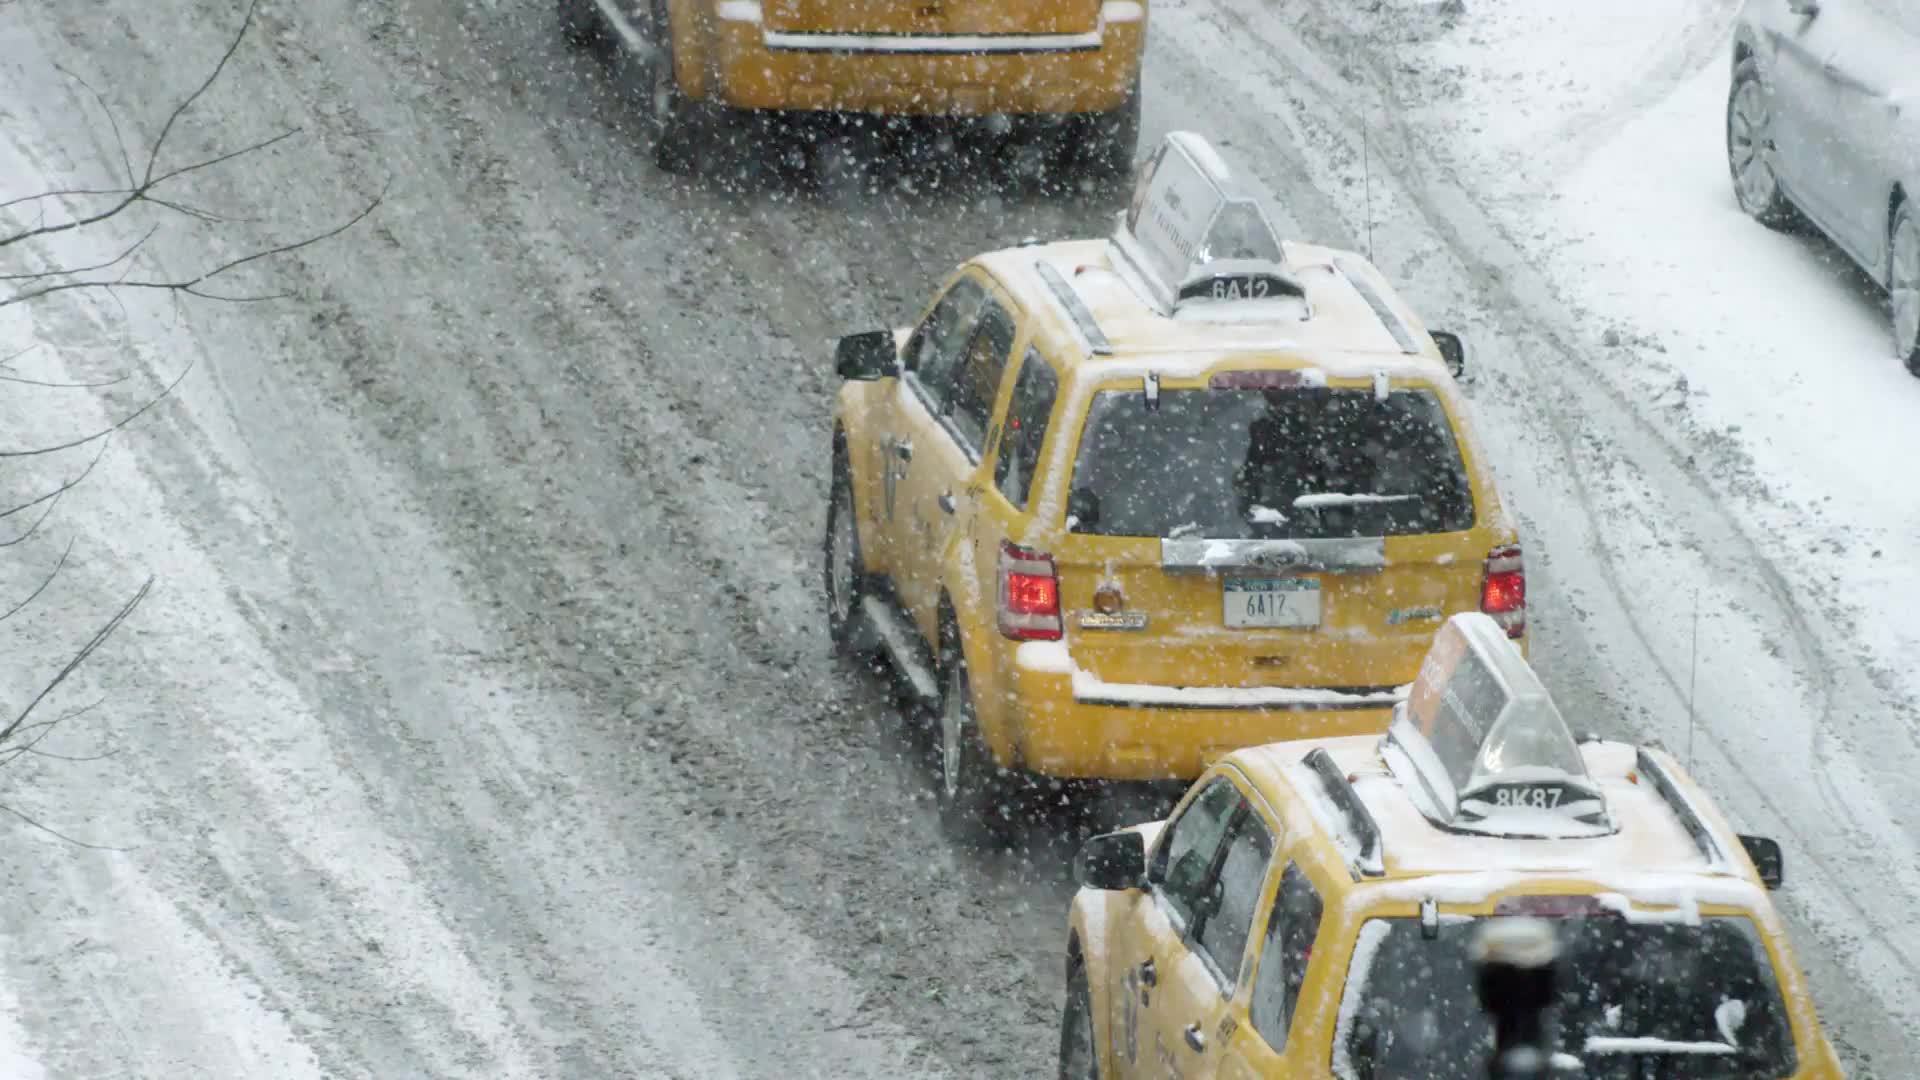 taxis in blizzard - cabs in traffic - taxicabs in winter snow storm street driving NYC